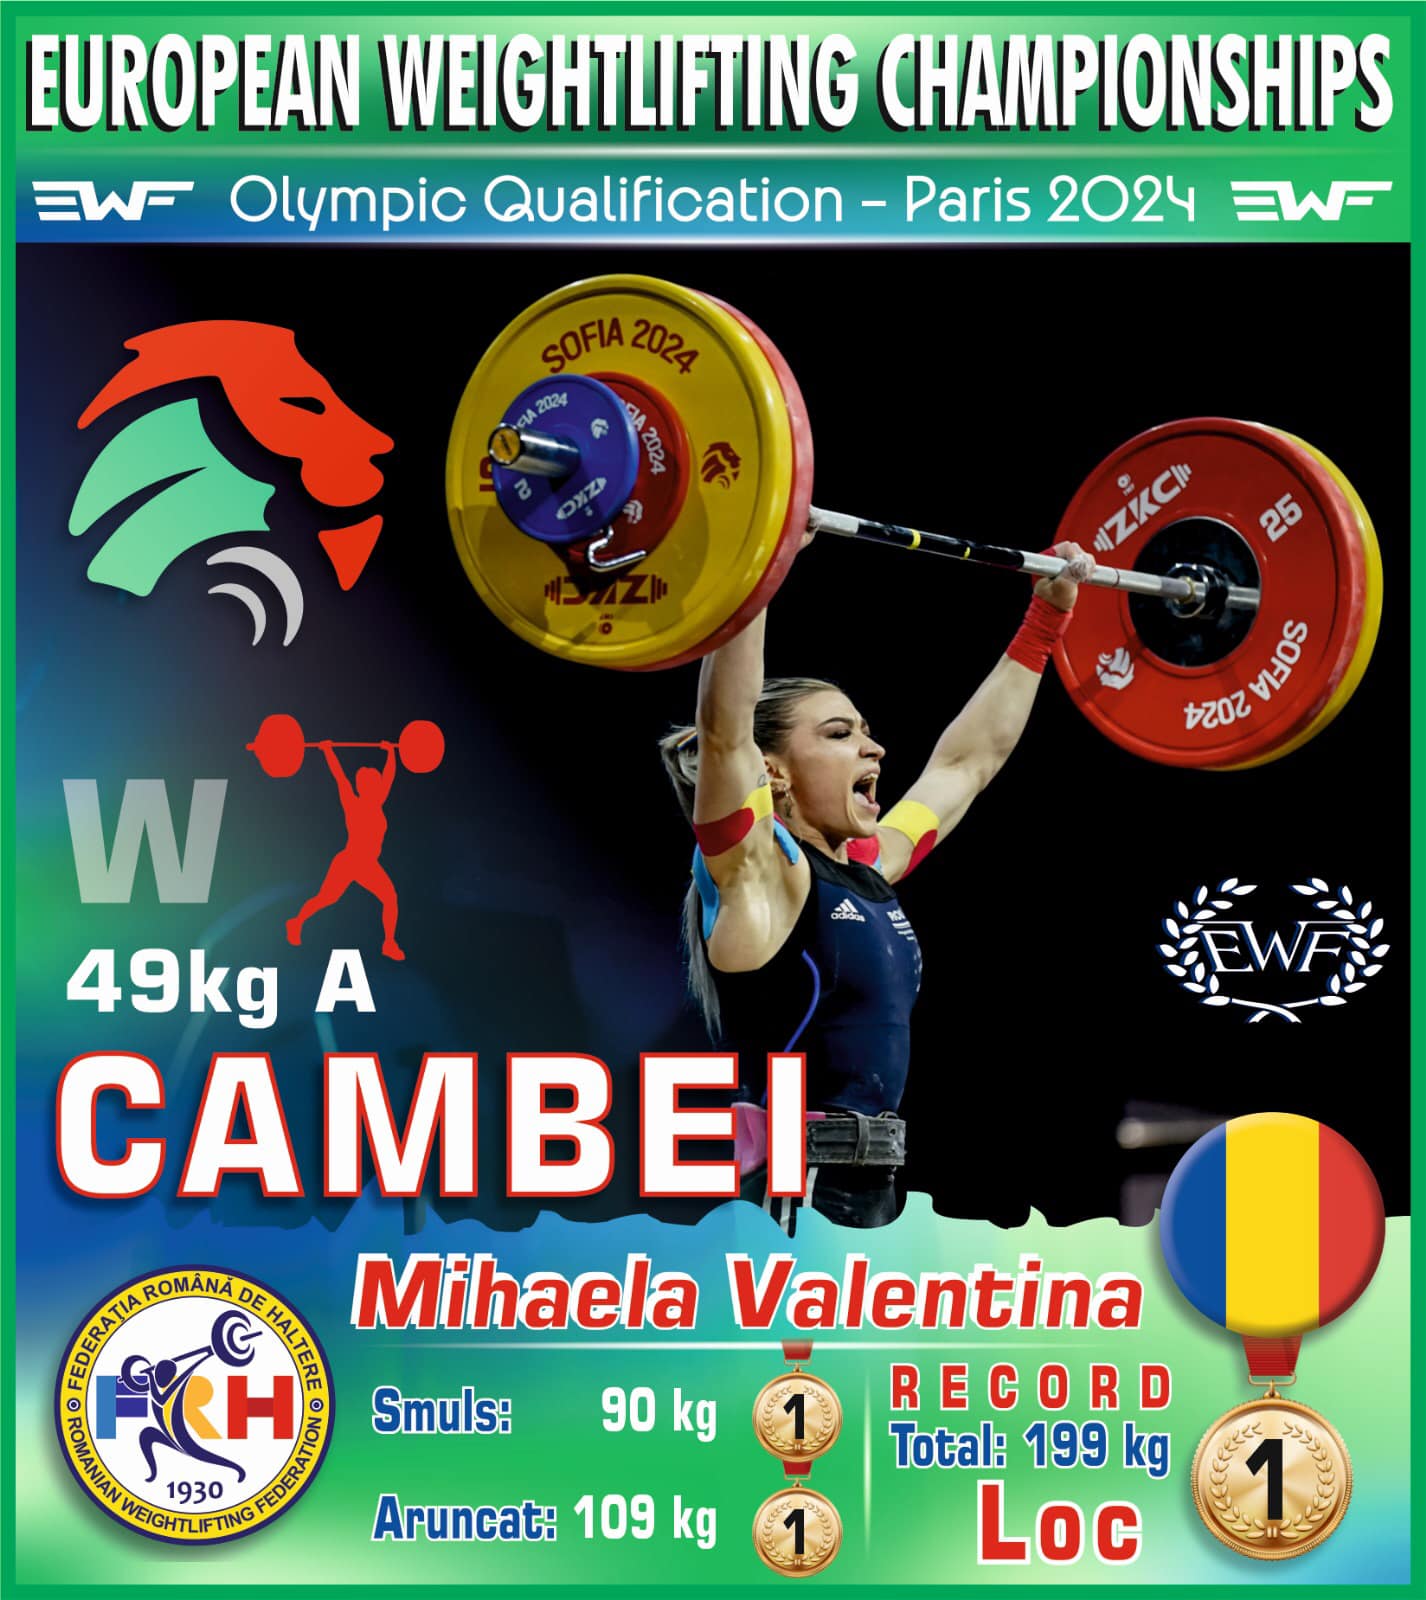 Romanian female athletes win three gold medals and one bronze at European Weightlifting Championships